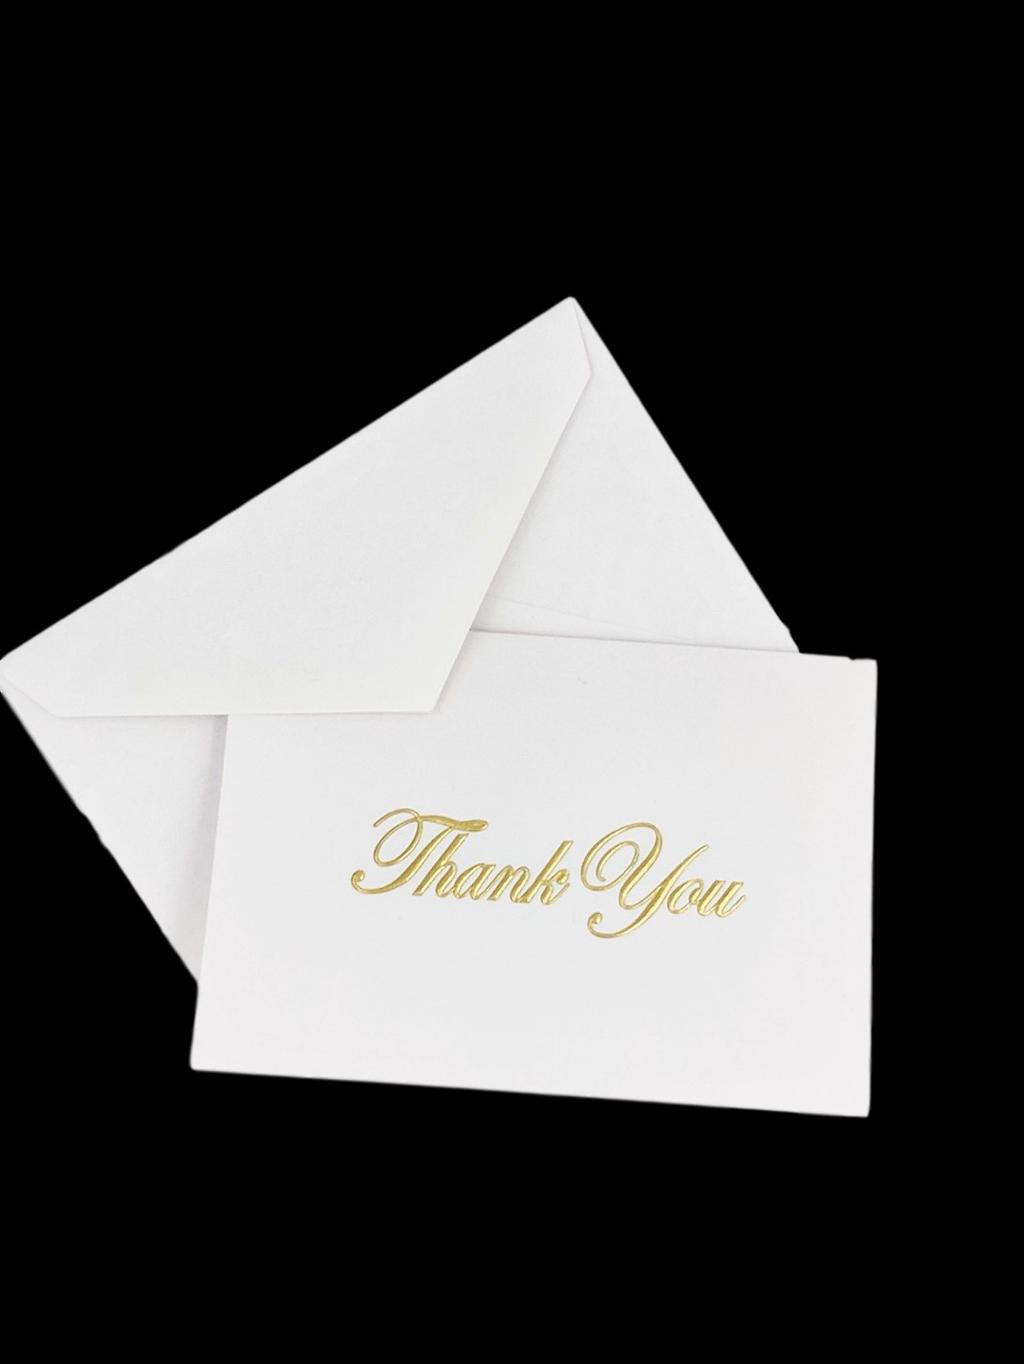 (set of 25) Includes envelope. Add a special touch with elegant embossed envelope seals.